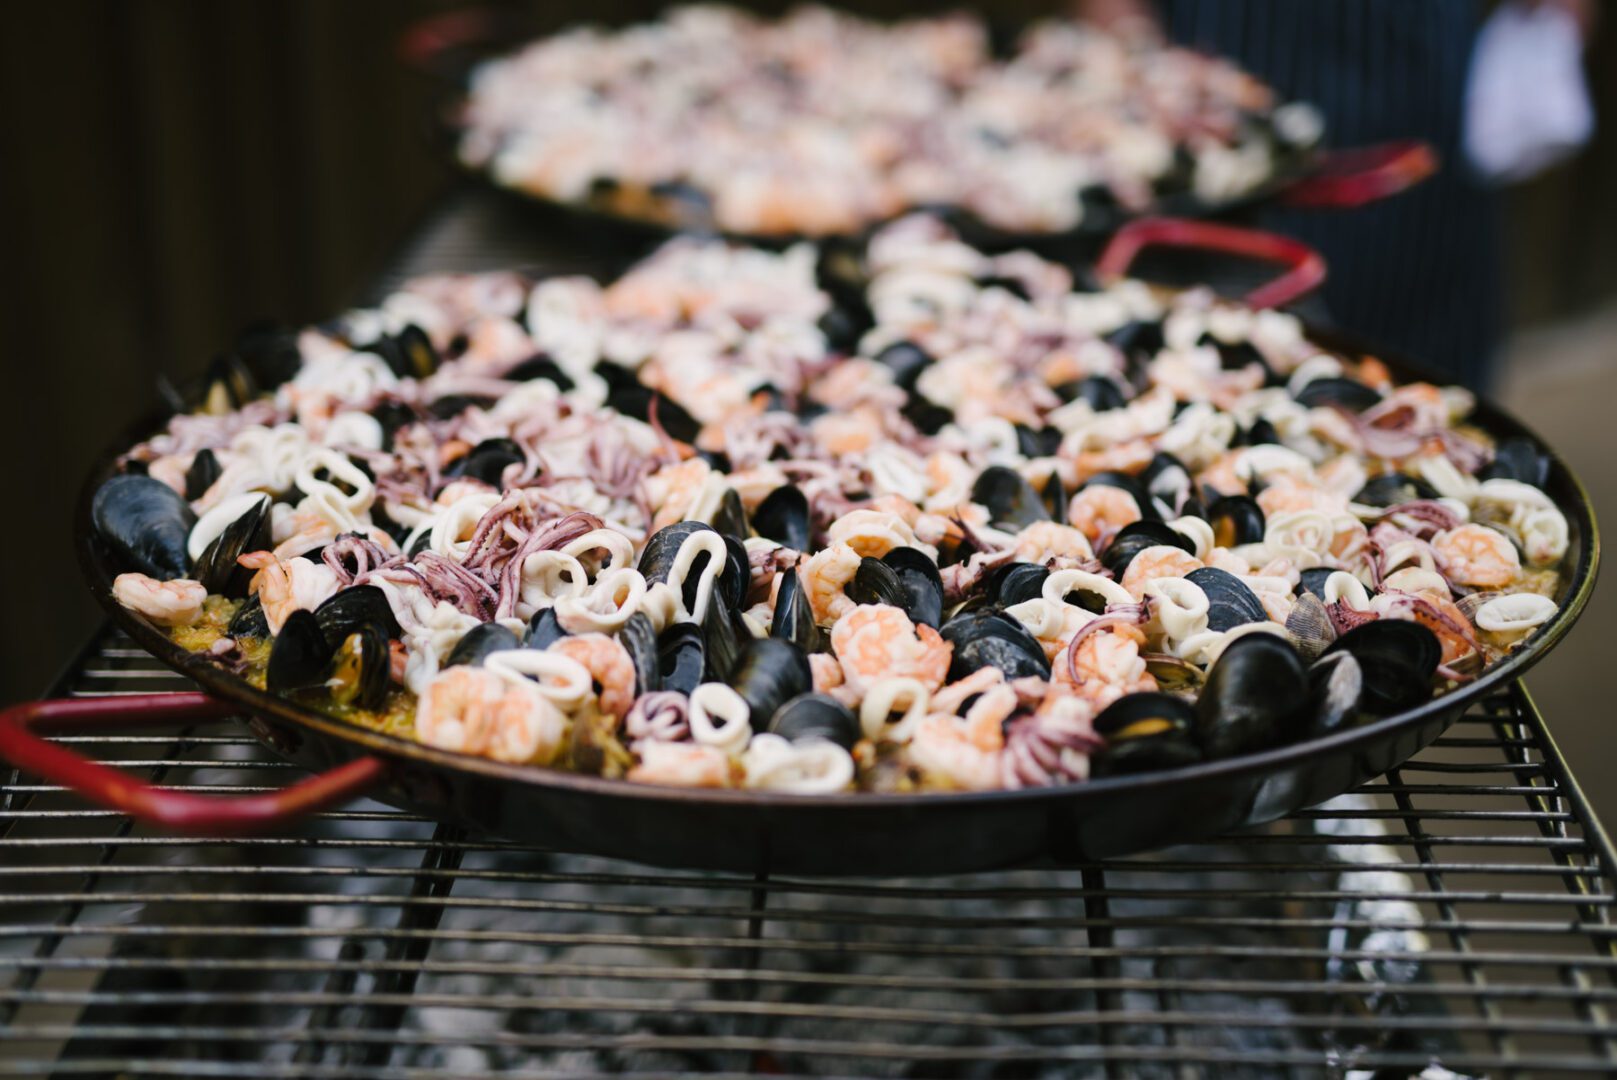 A pan full of seafood and clams on a grill.